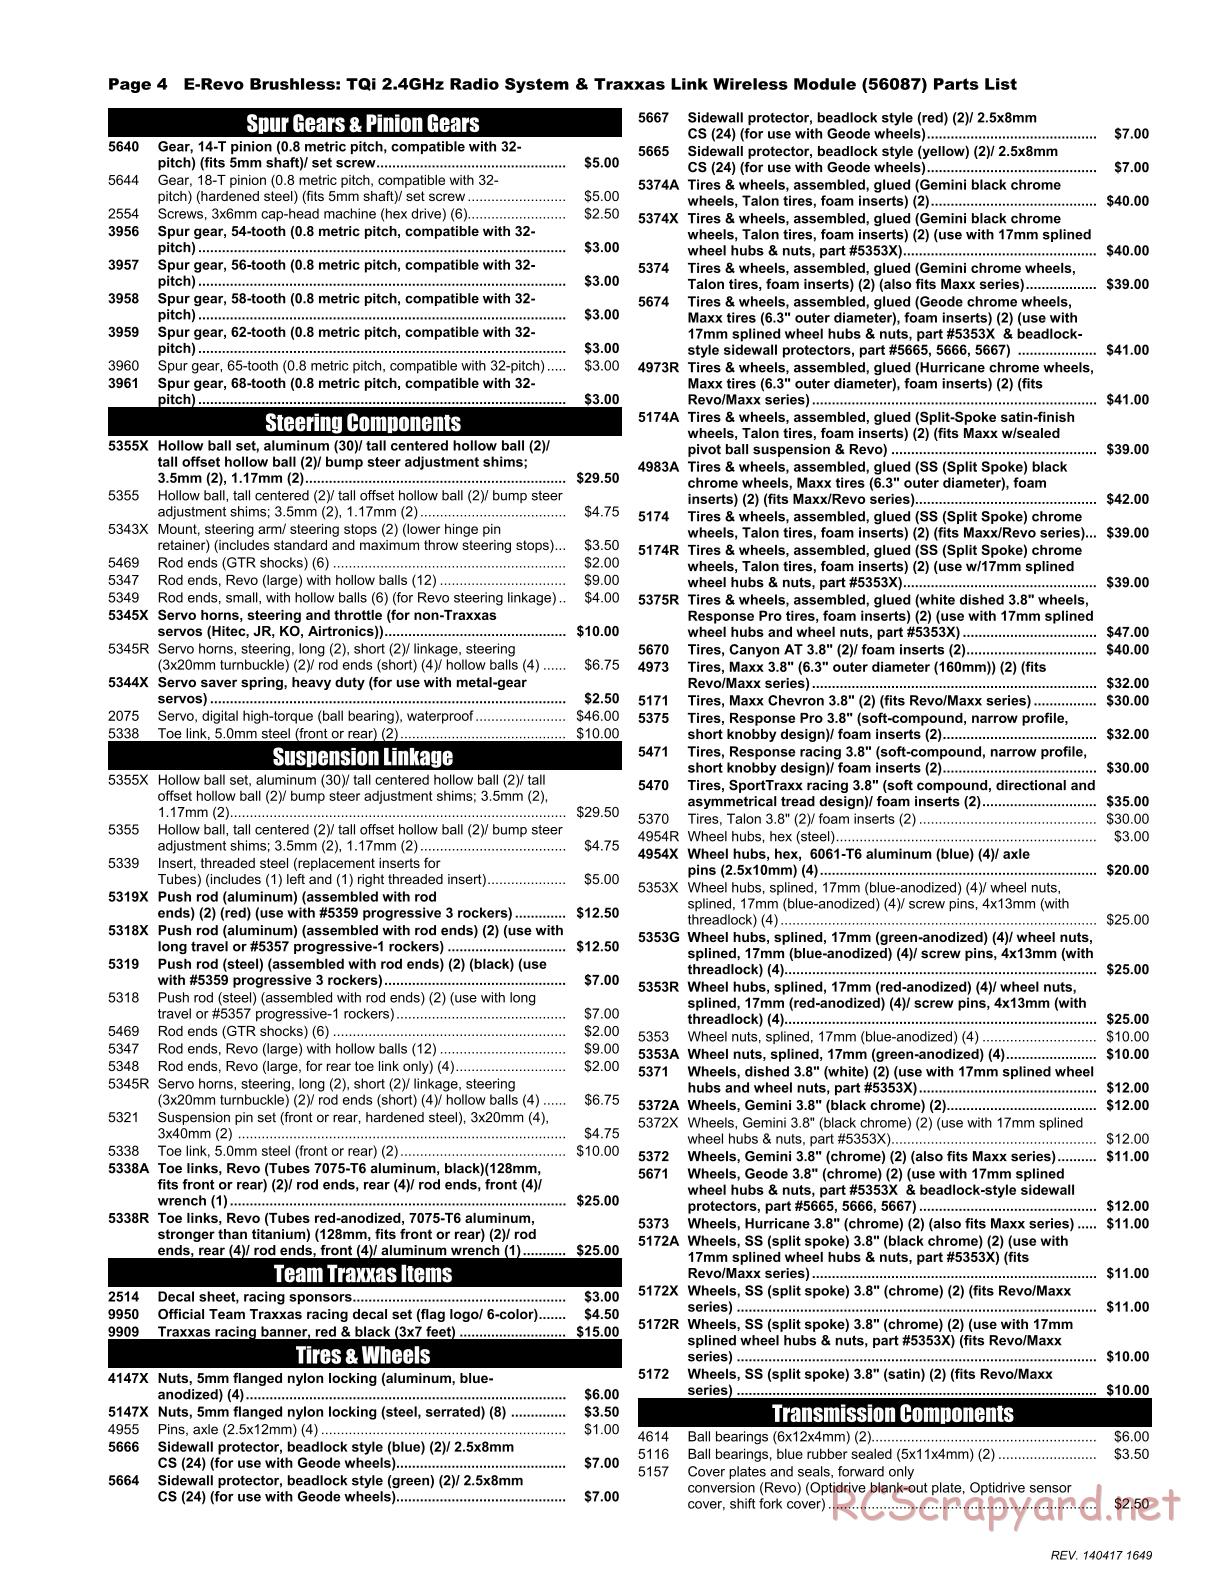 Traxxas - E-Revo Brushless (2014) - Parts List - Page 4